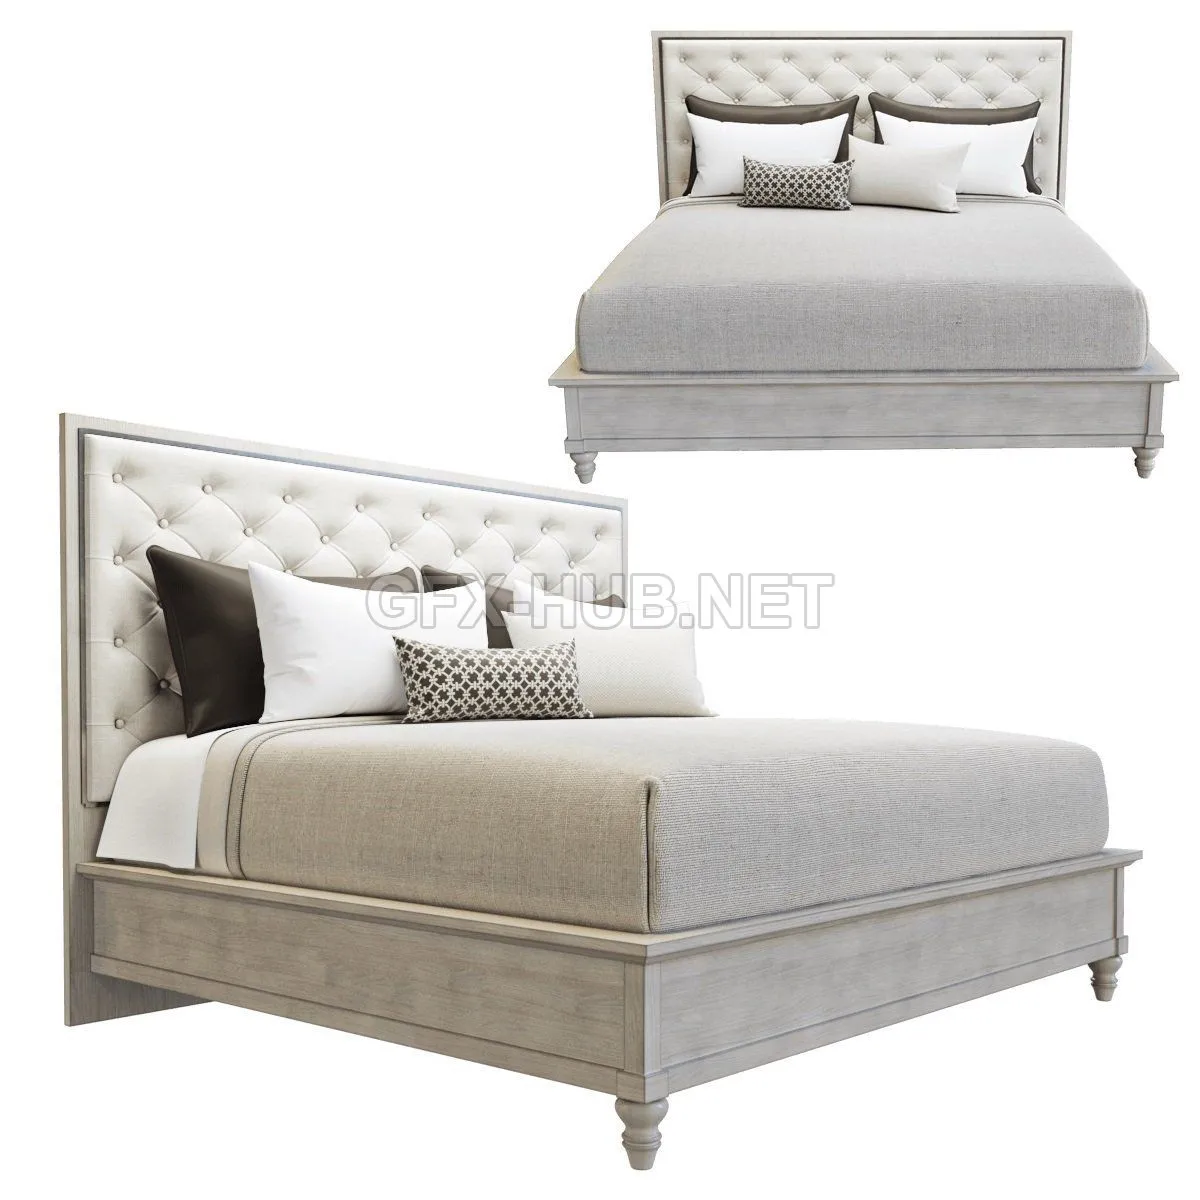 BED – Bed from Oyster Bay collection